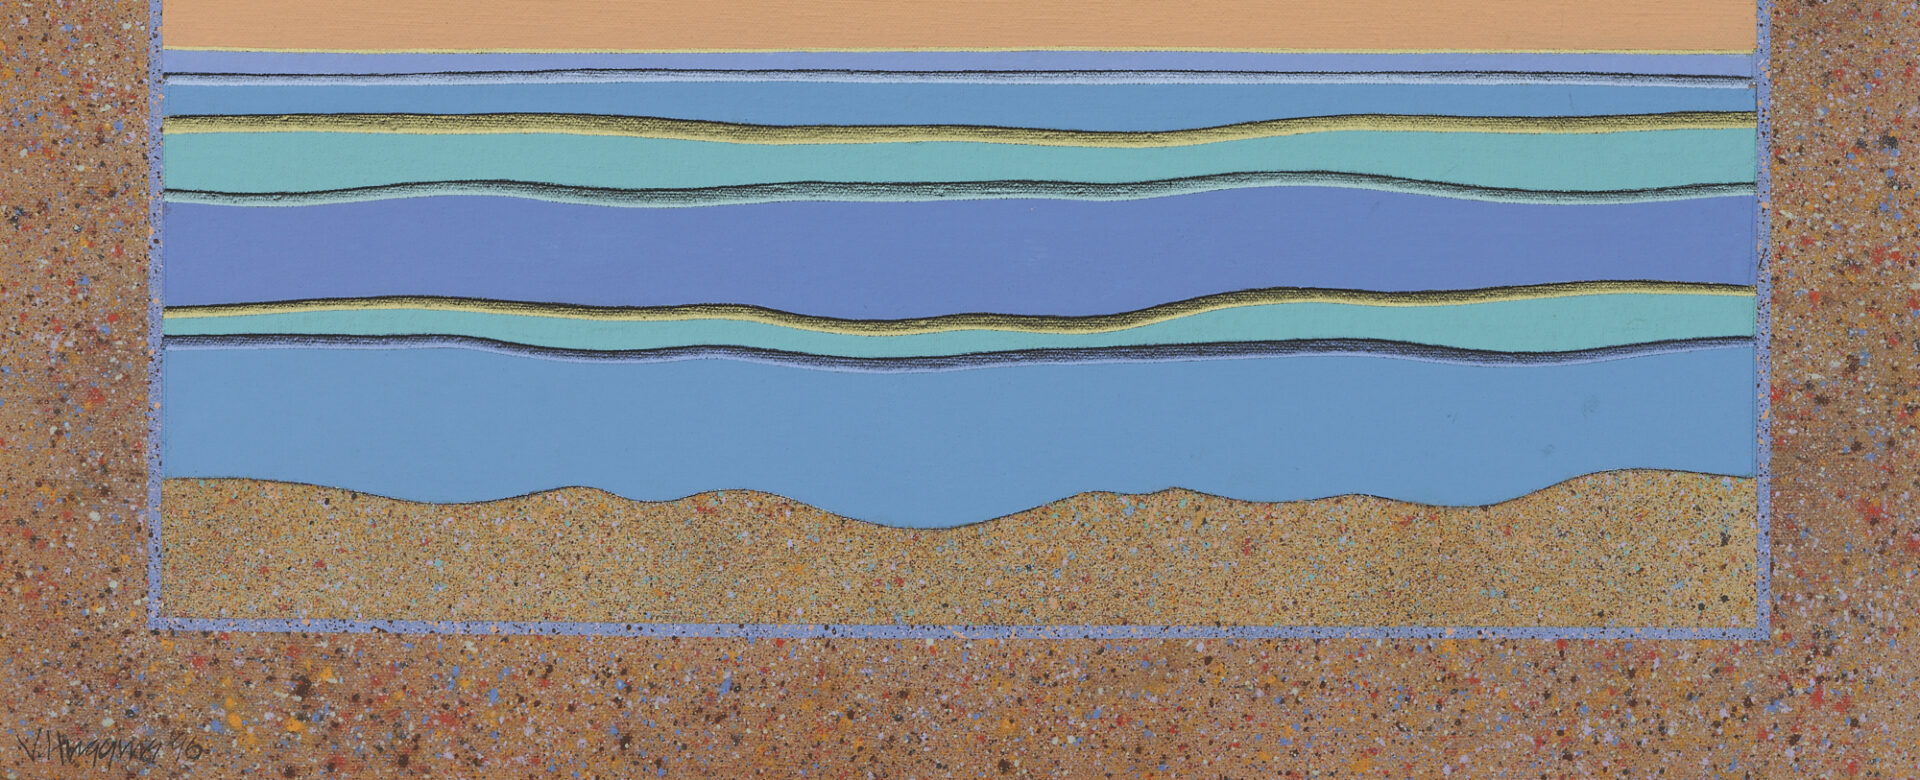 Lot 473: Victor Huggins Acrylic on Canvas Seascape Painting, Cape Hatteras